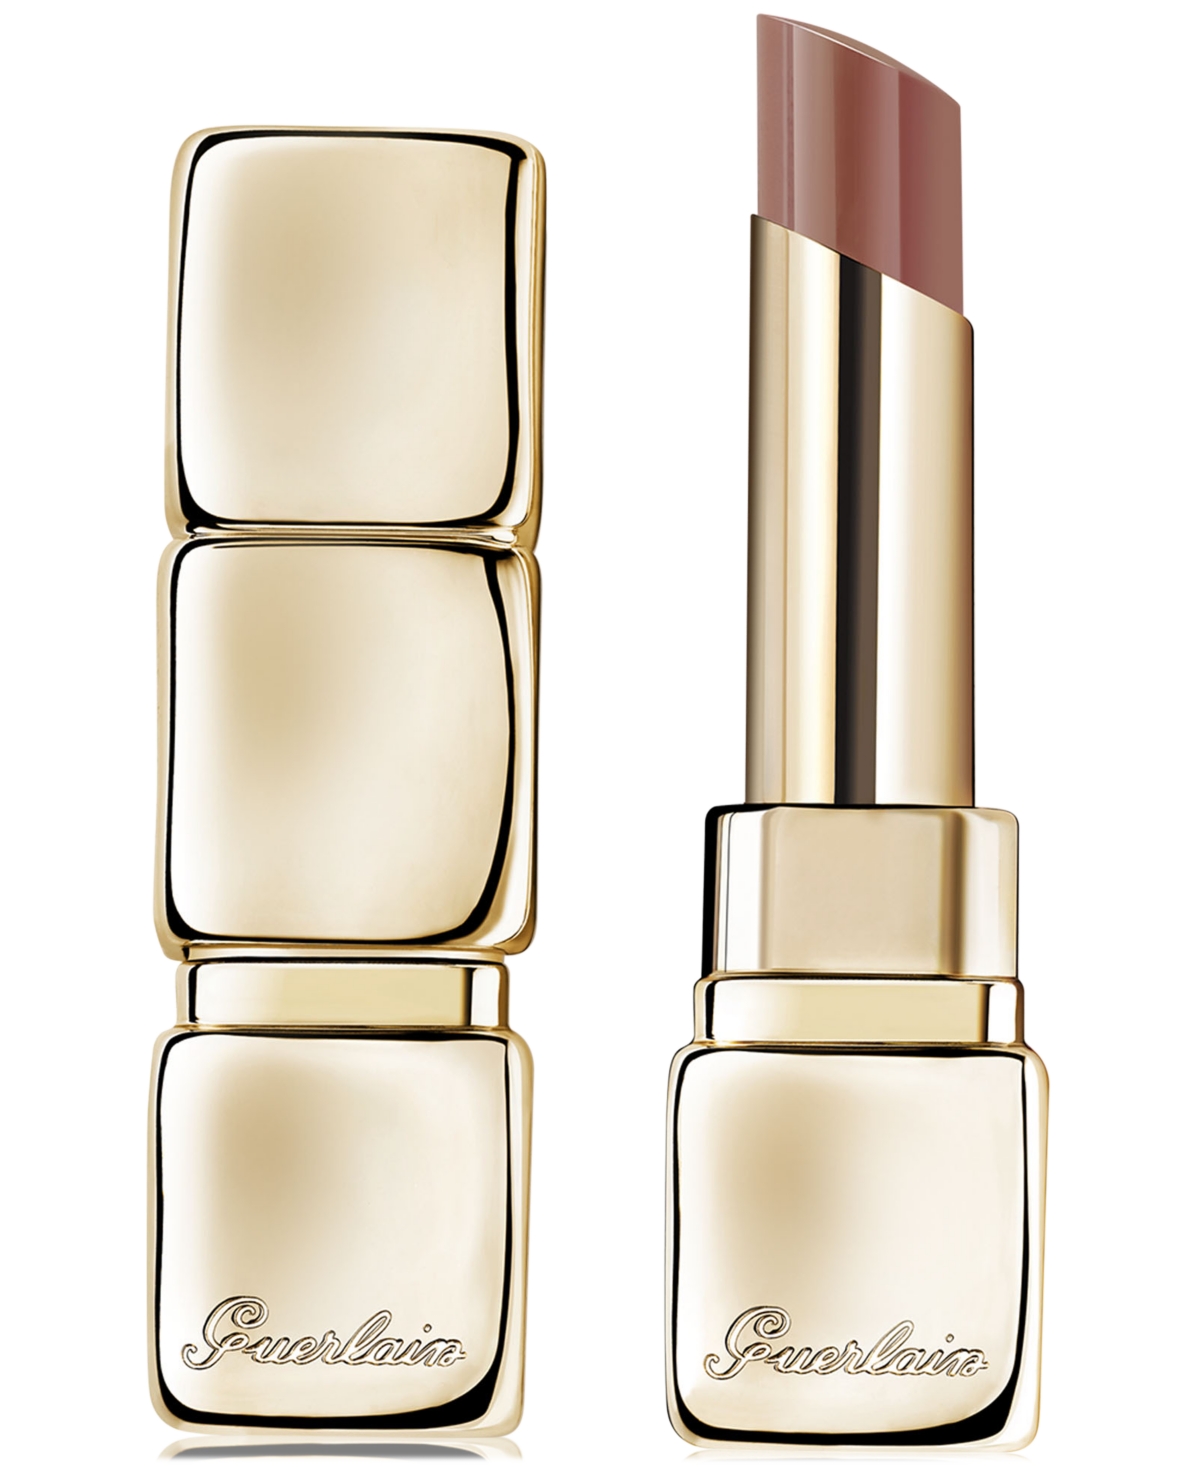 Guerlain Kisskiss Shine Bloom Lipstick In - Floral Nude